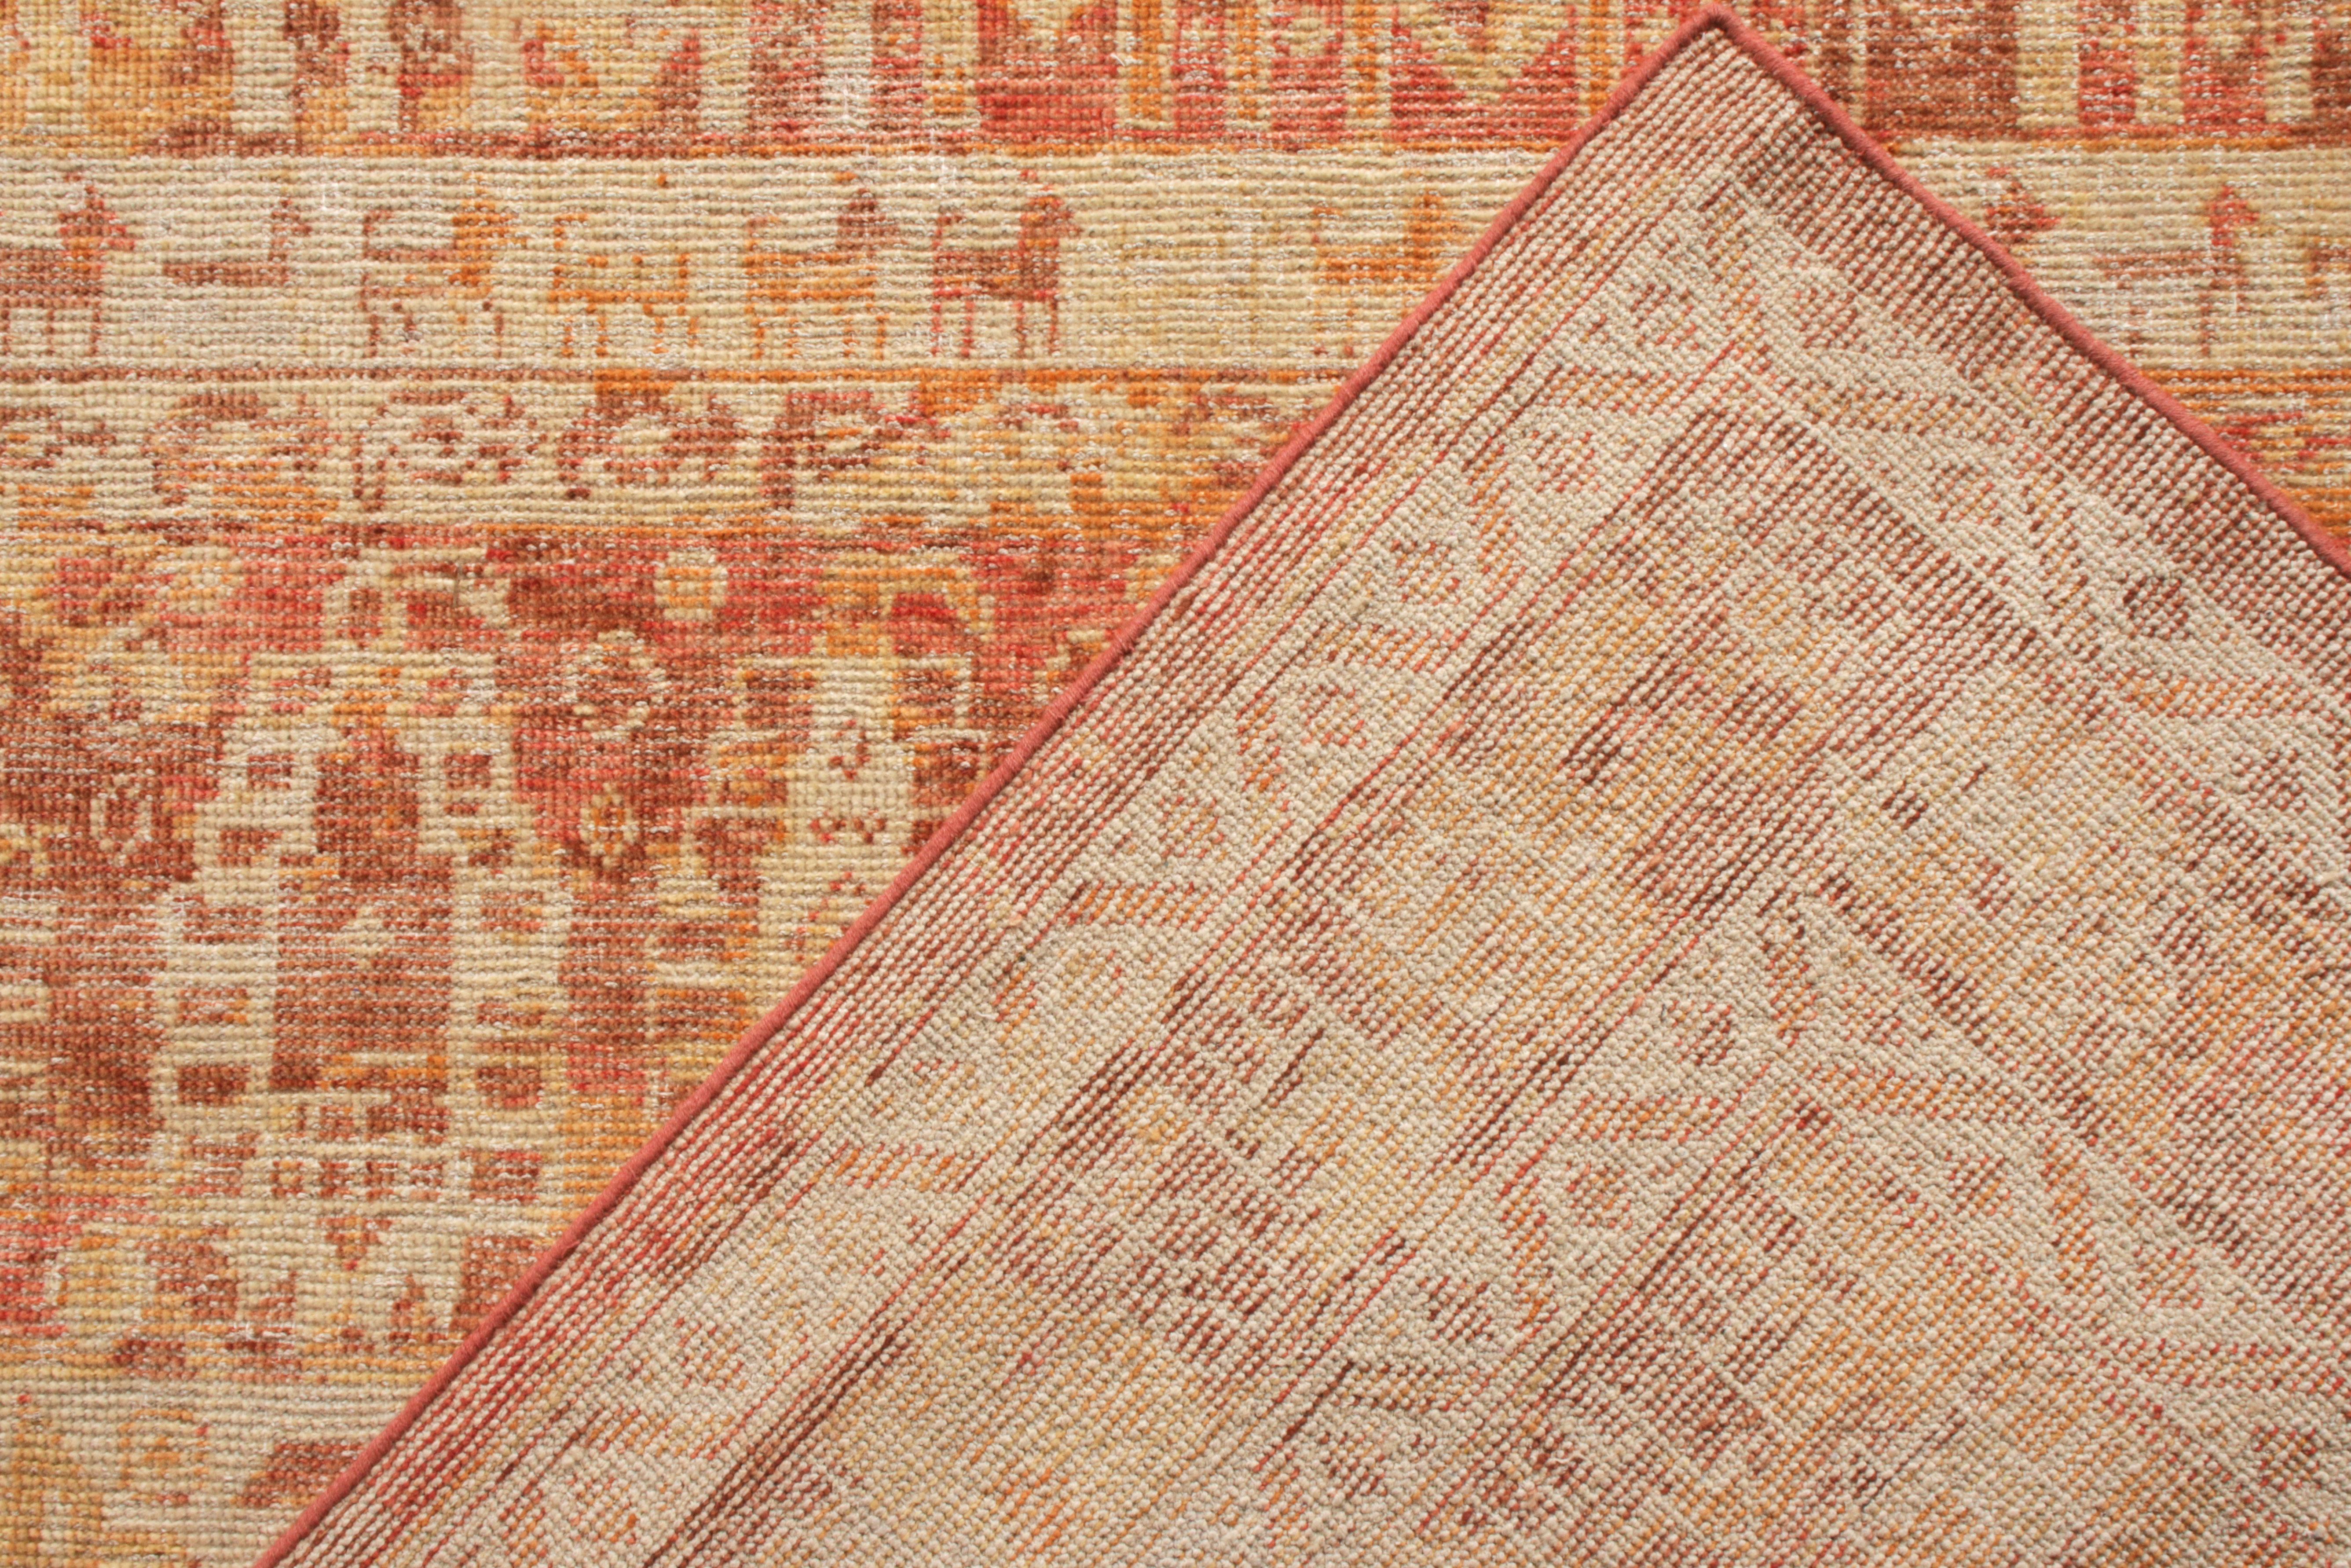 Rug & Kilim’s Distressed Style Tribal Rug in Red Orange Geometric Pattern In New Condition For Sale In Long Island City, NY